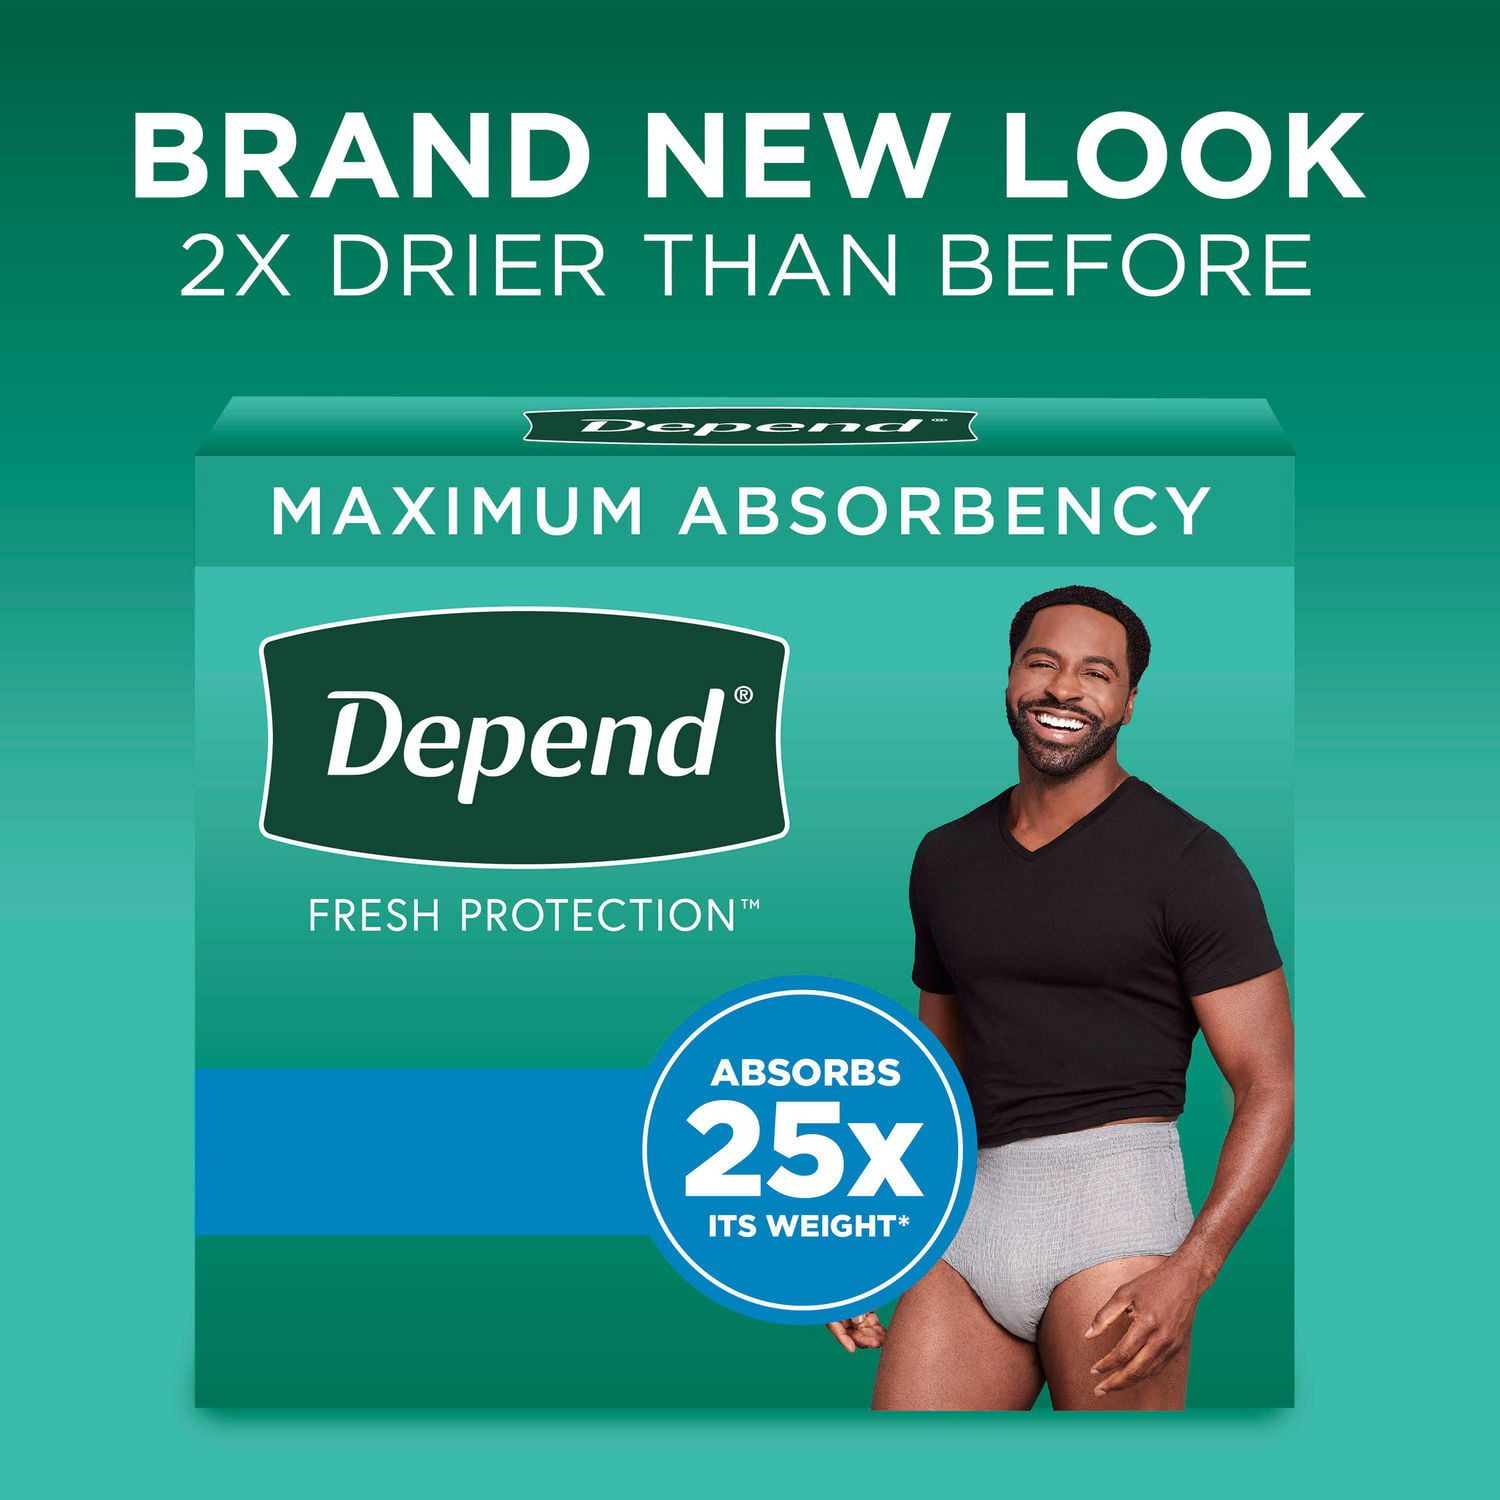 Depend Fresh Protection Adult Incontinence Underwear for Men